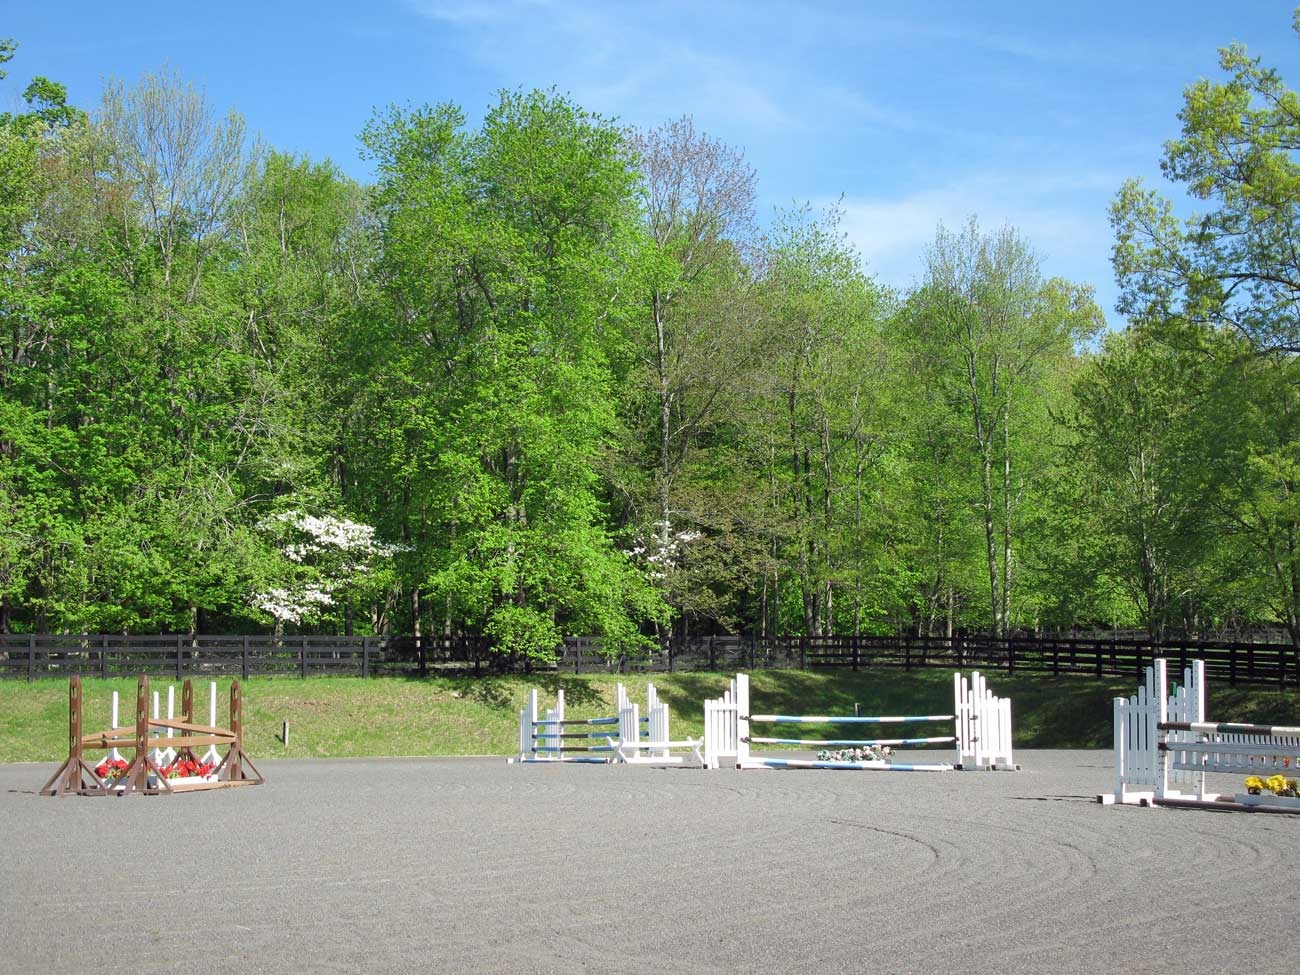 Second view of outdoor ring with course of jumps